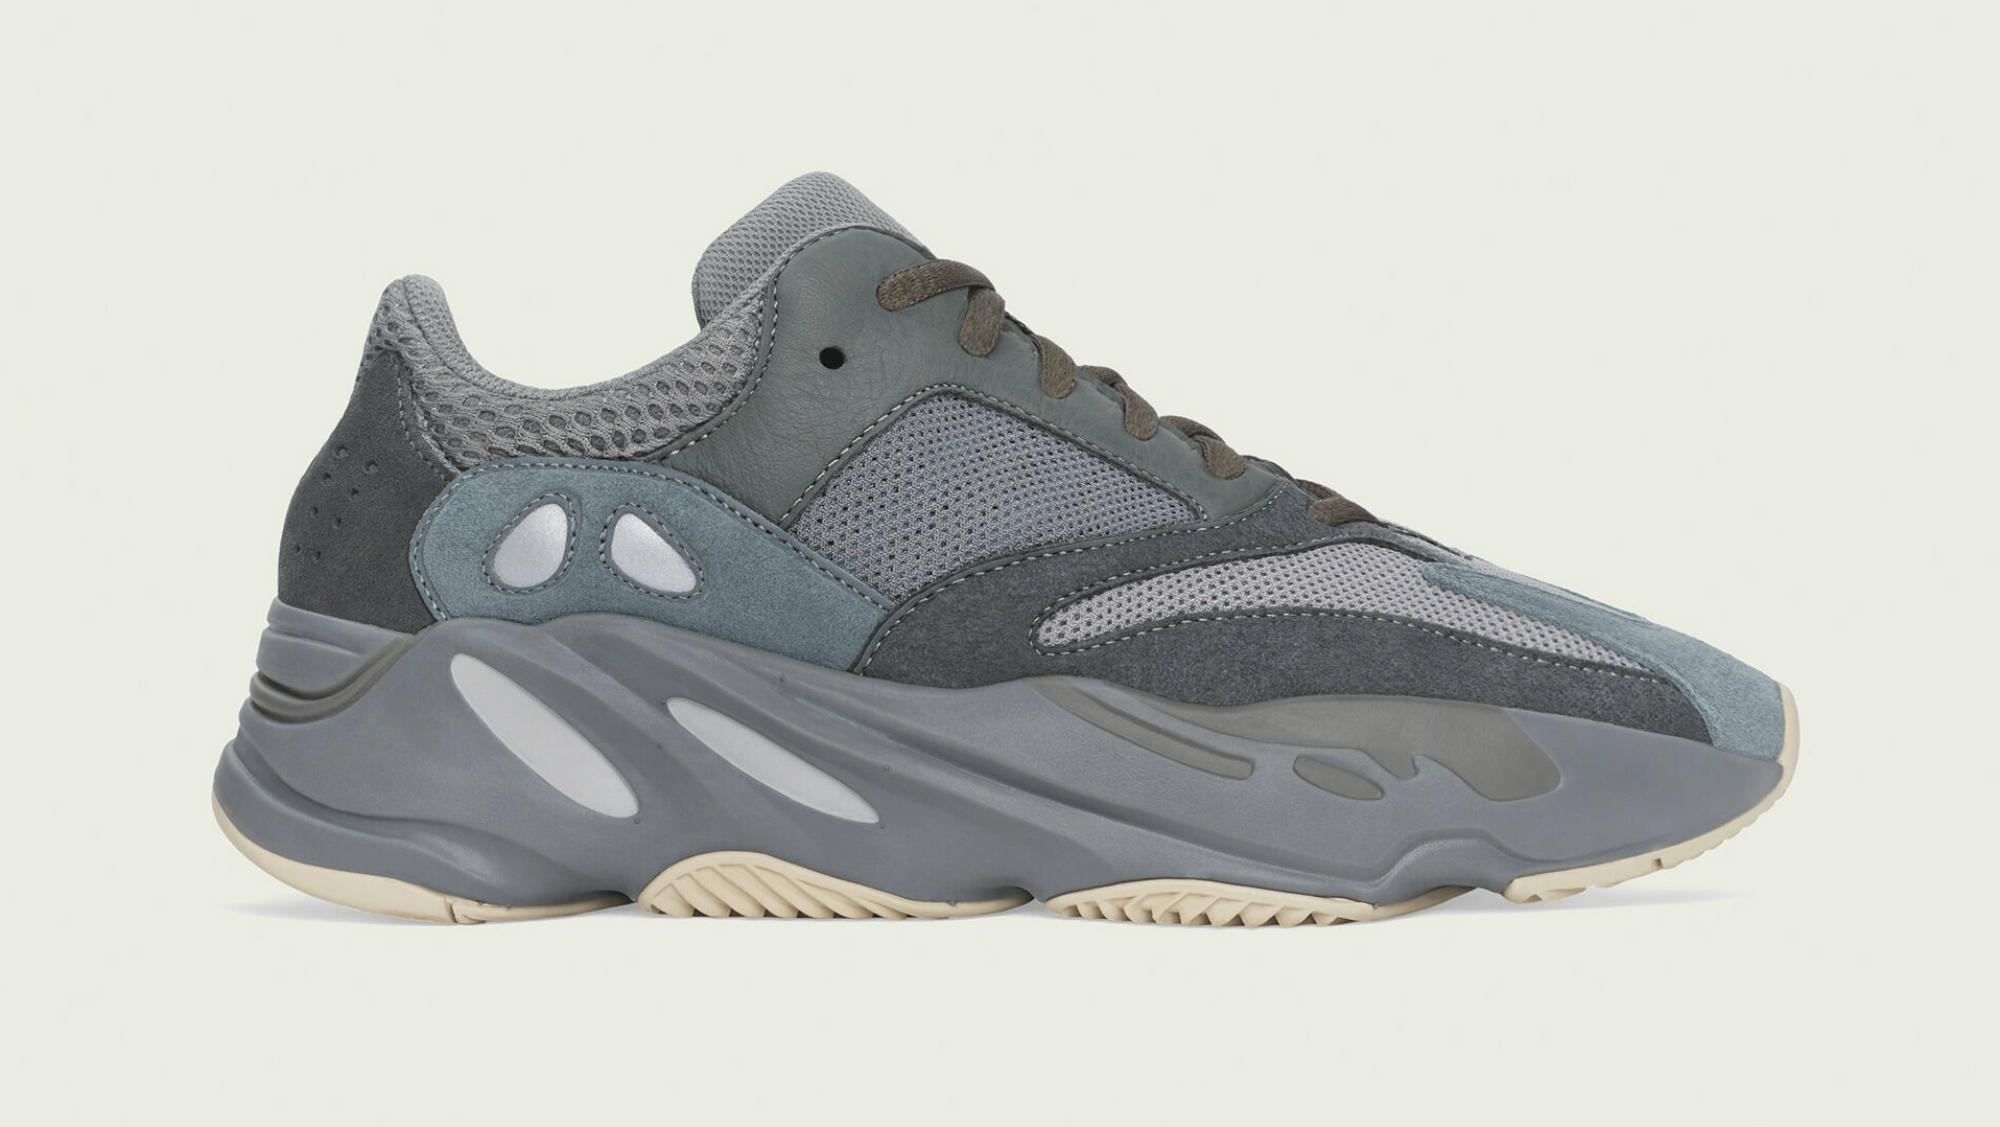 adidas yeezy boost 700 teal blue fw2499 release date